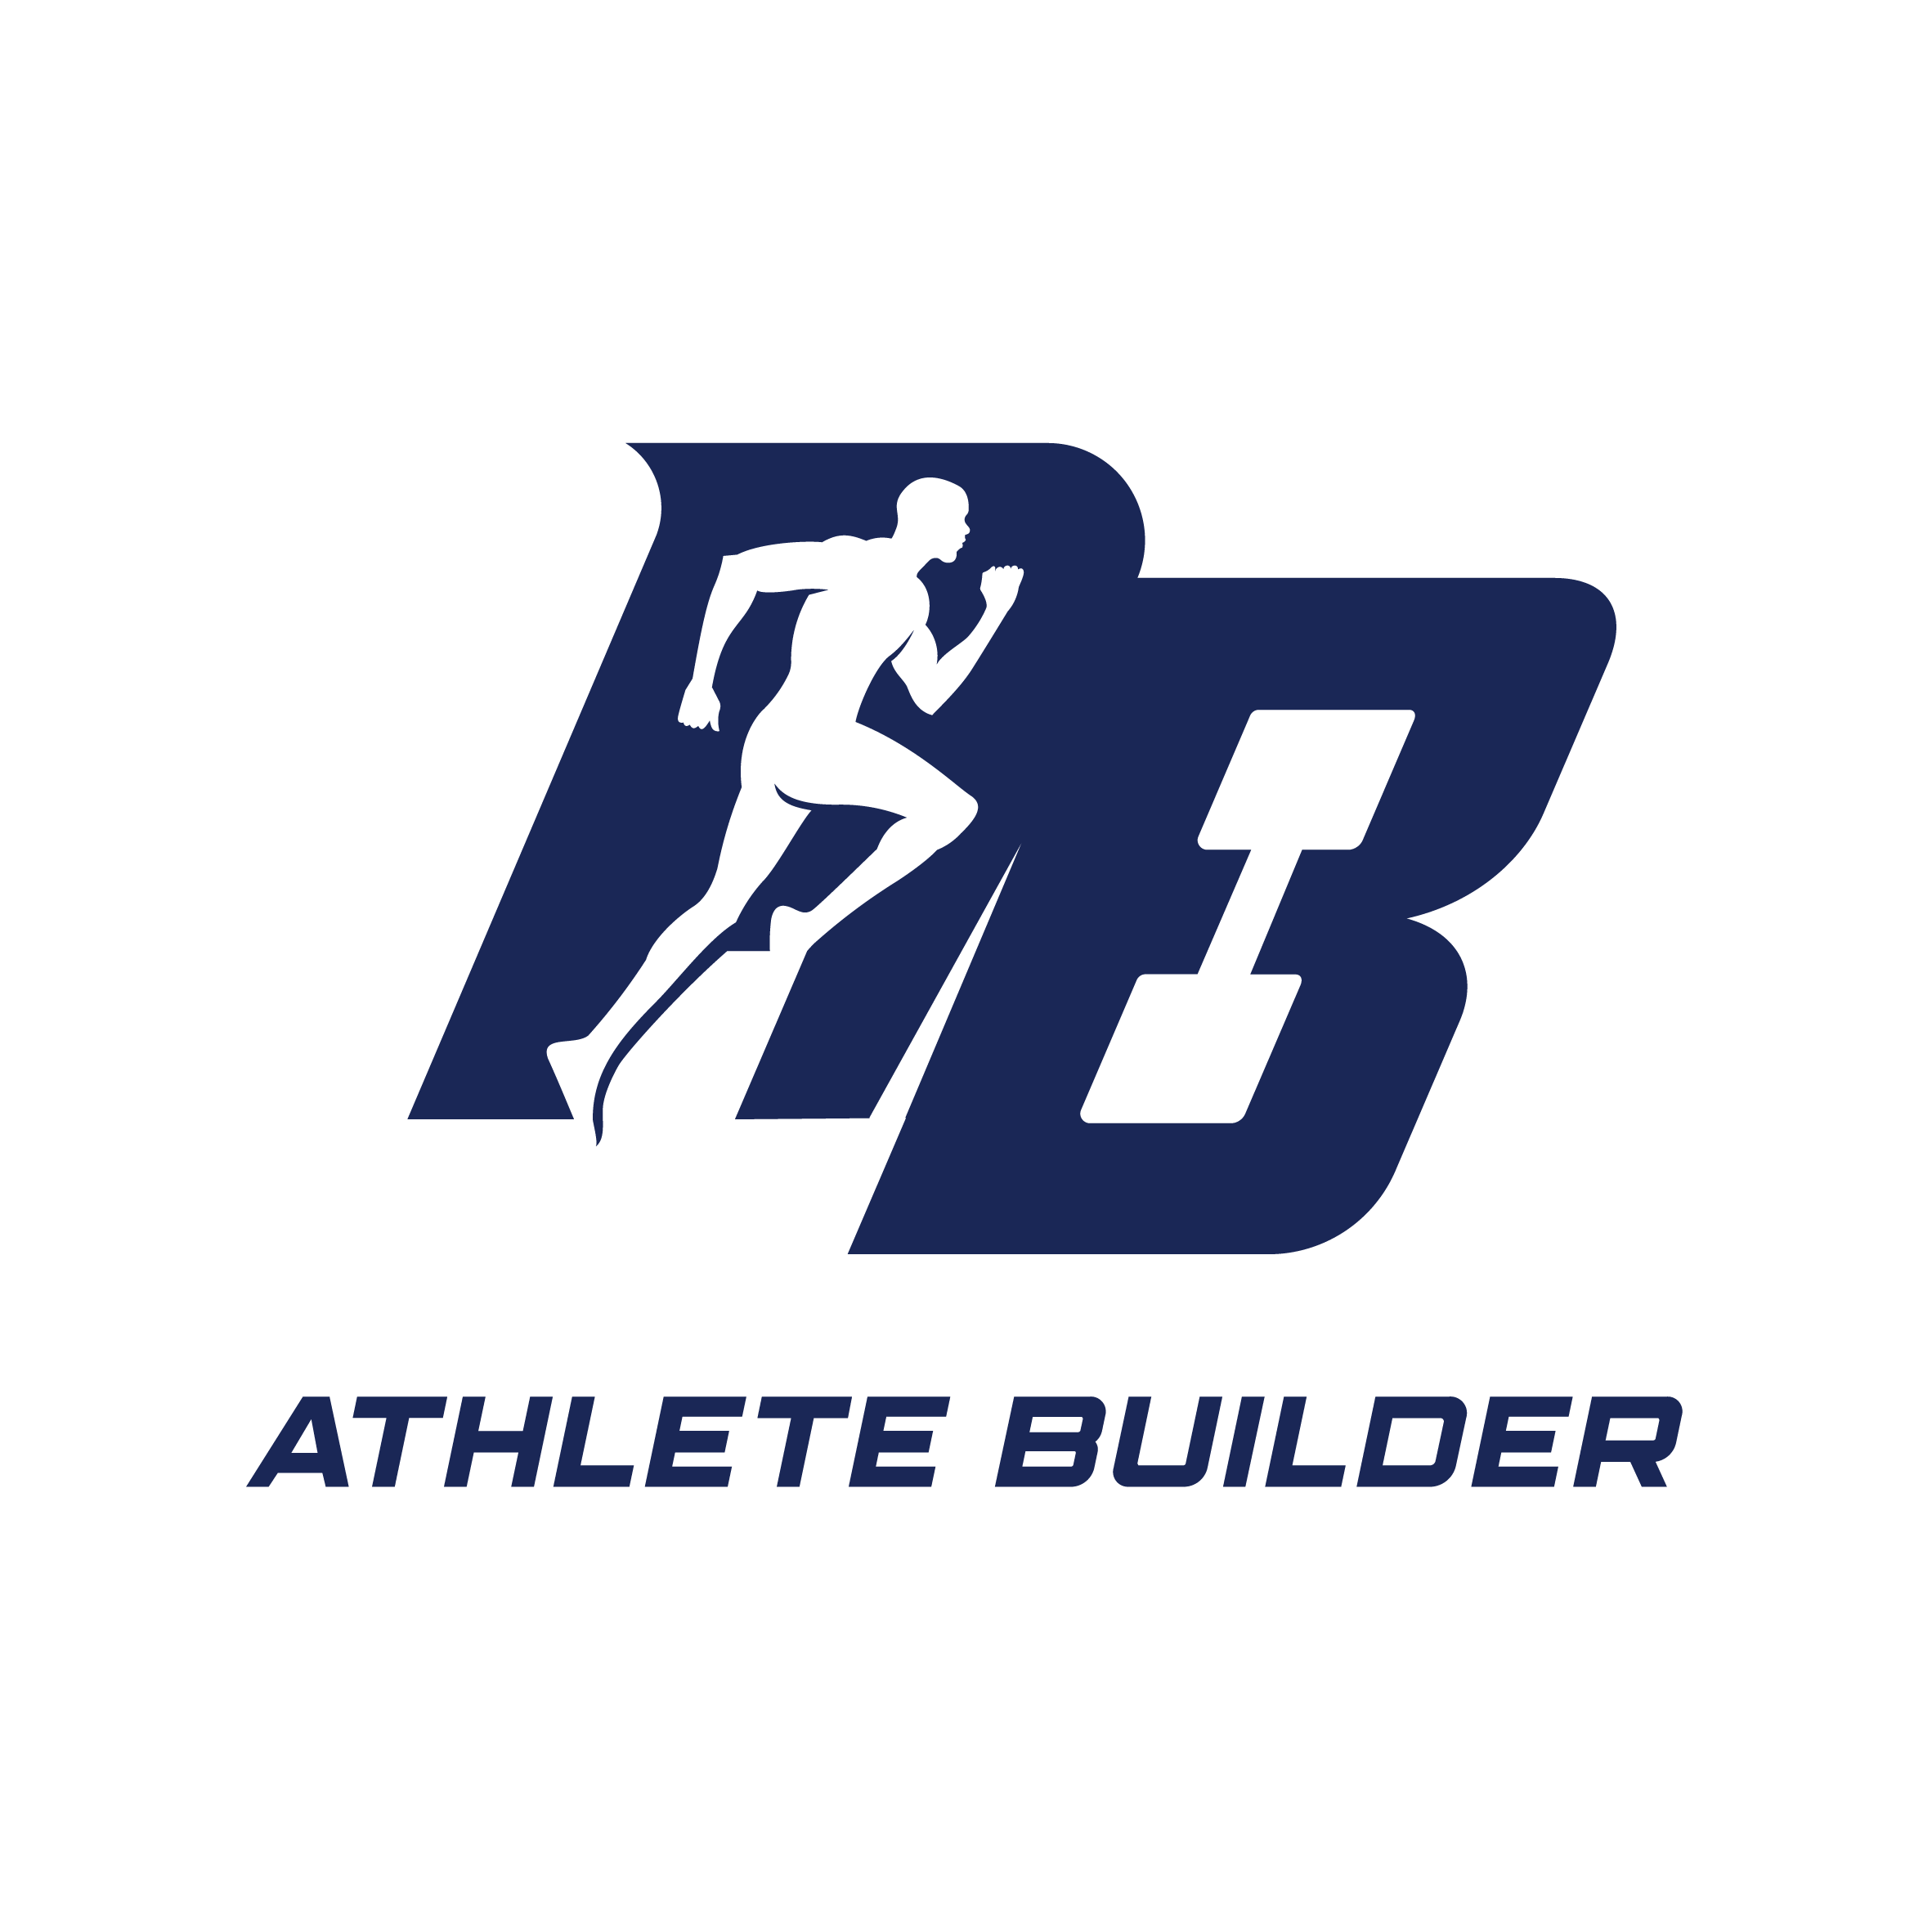 Athlete Builder logo design by logo designer Tortoiseshell Black for your inspiration and for the worlds largest logo competition